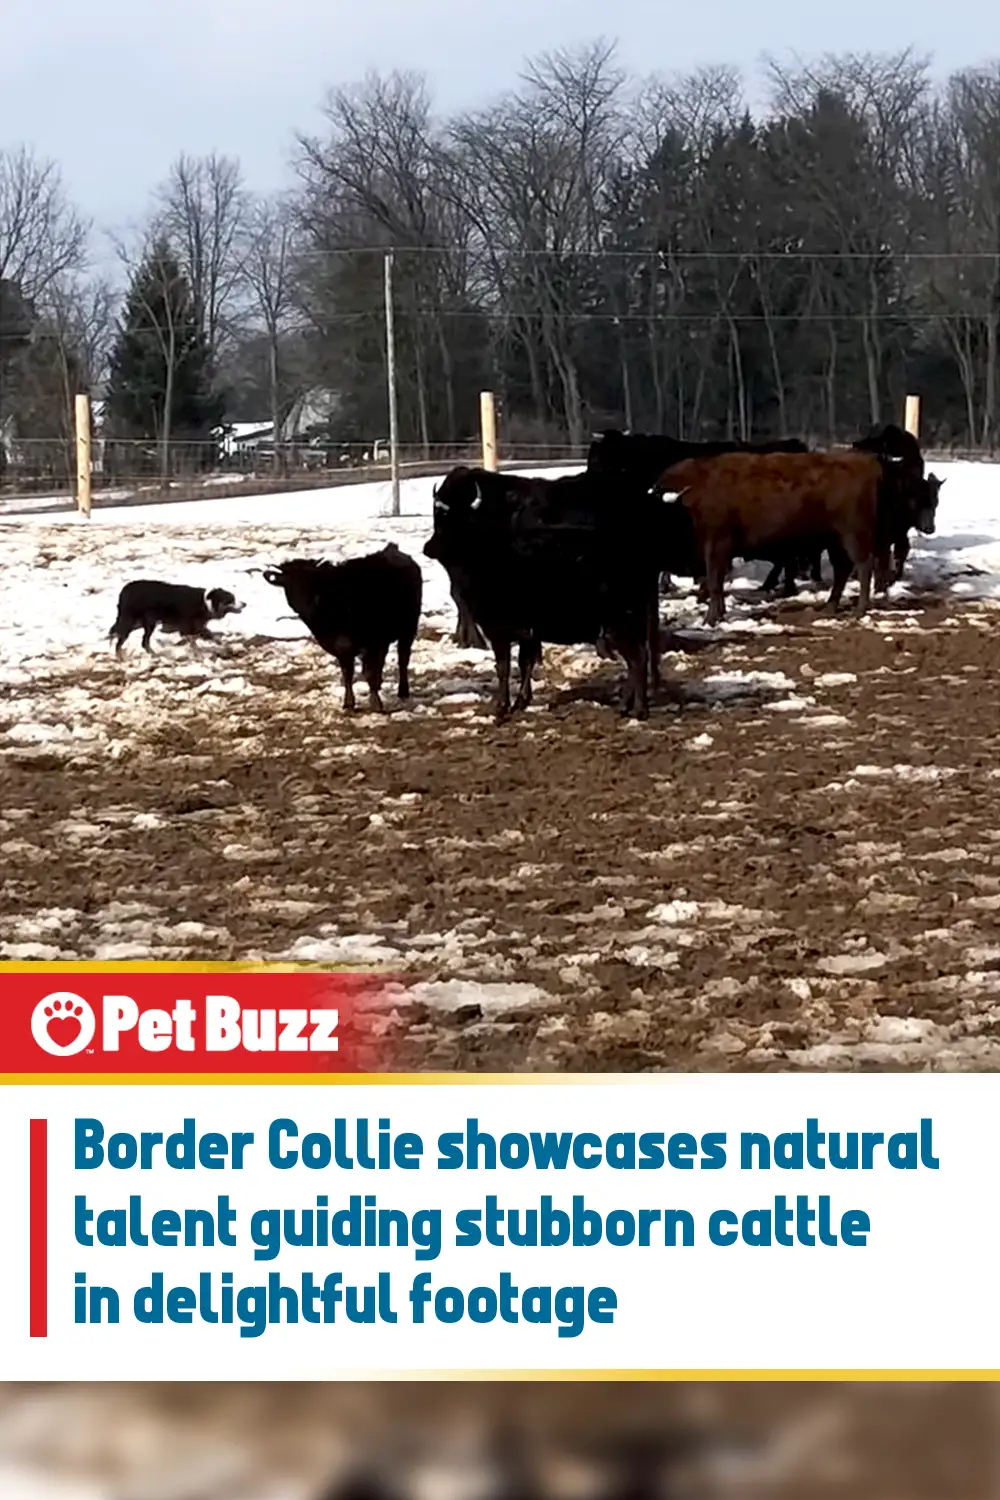 Border Collie showcases natural talent guiding stubborn cattle in delightful footage